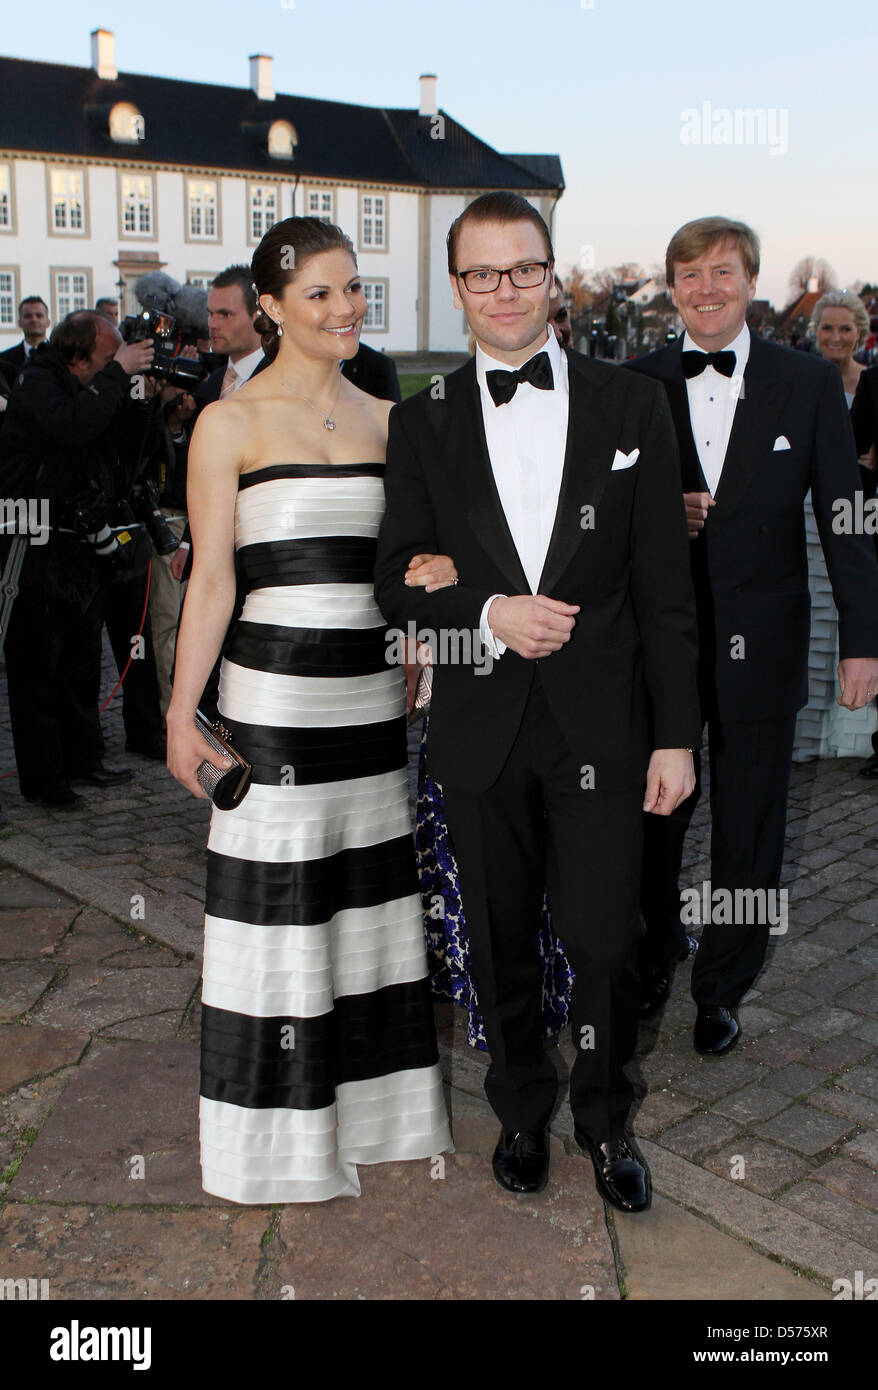 Crown Princess Victoria of Sweden (L) and her fiancee Daniel Westling (R) arrive for the gala dinner on the occasion of the celebration of Queen Margrethe II of Denmark's 70th birthday at Fredensborg Palace, Denmark, 16 April 2010. Photo: Patrick van Katwijk Stock Photo